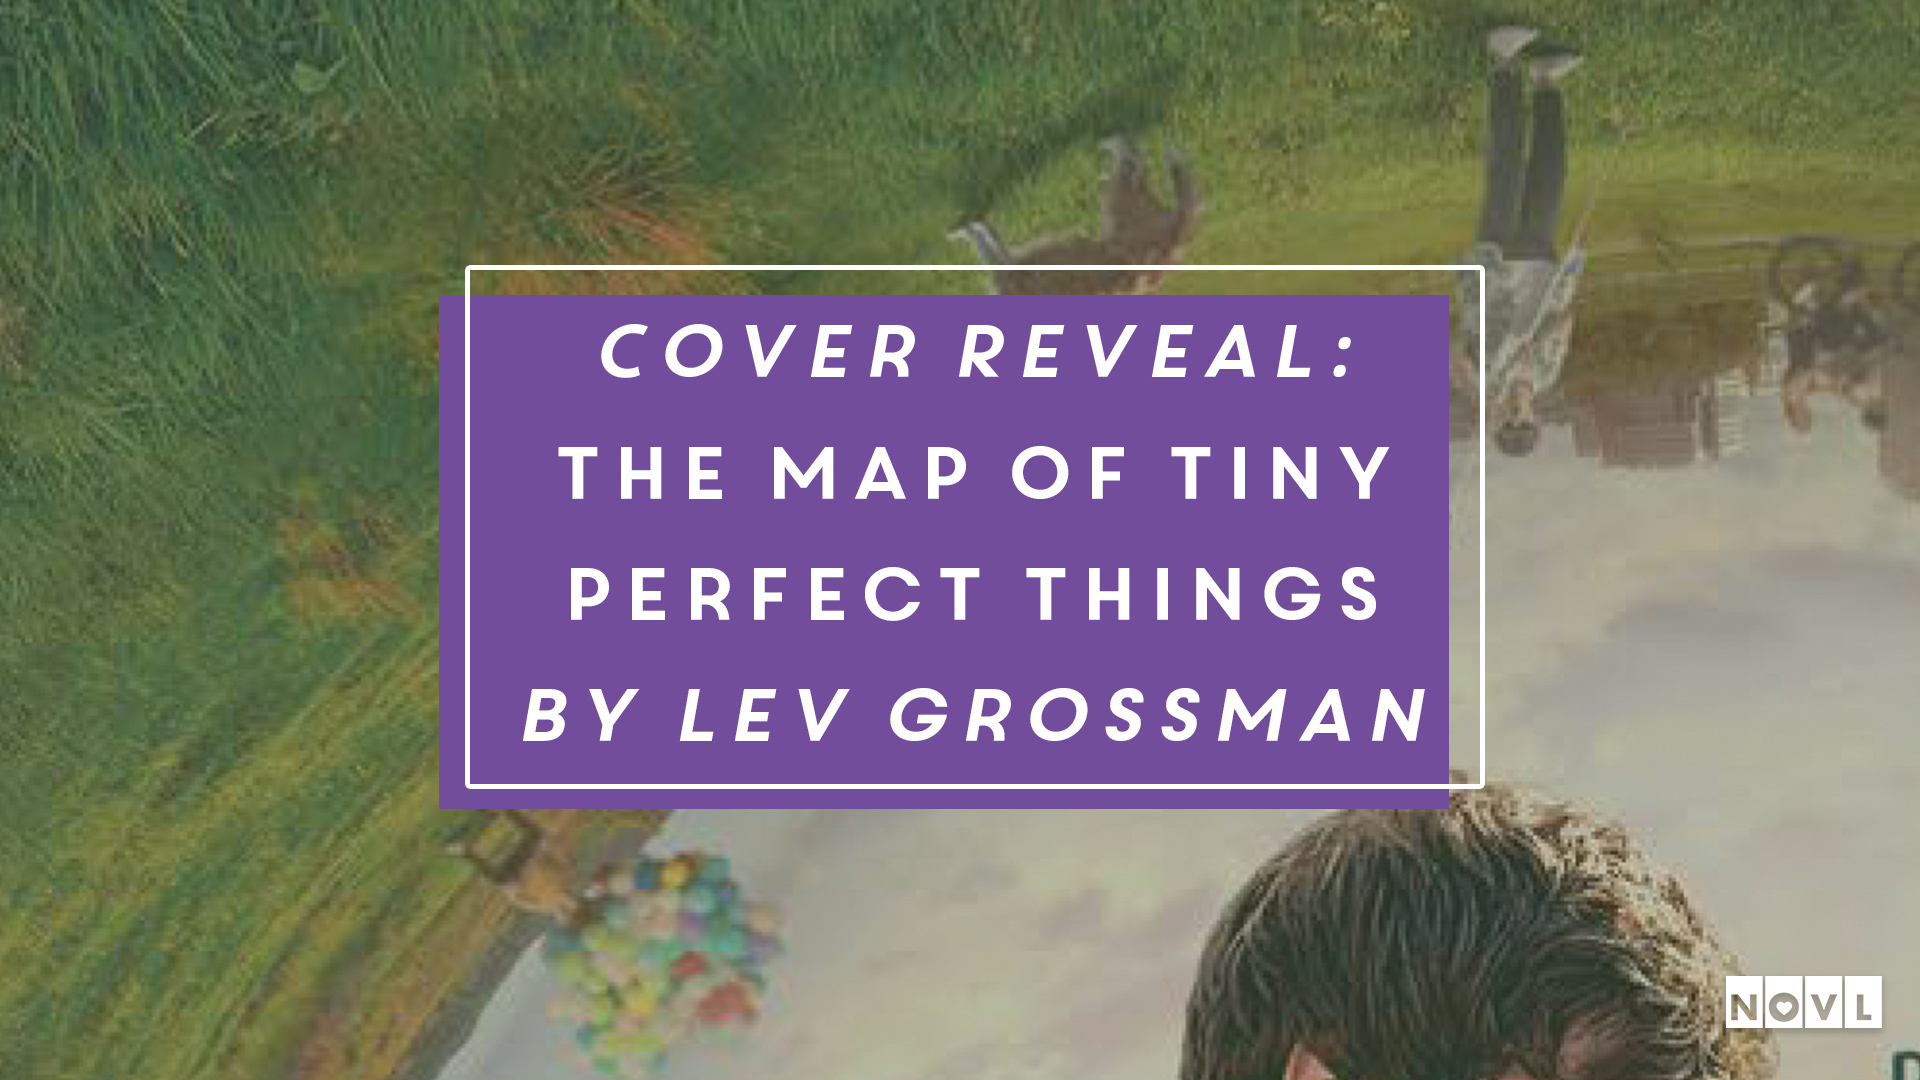 The NOVL Blog, Featured Image for Article: Cover Reveal: The Map of Tiny Perfect Things by Lev Grossman